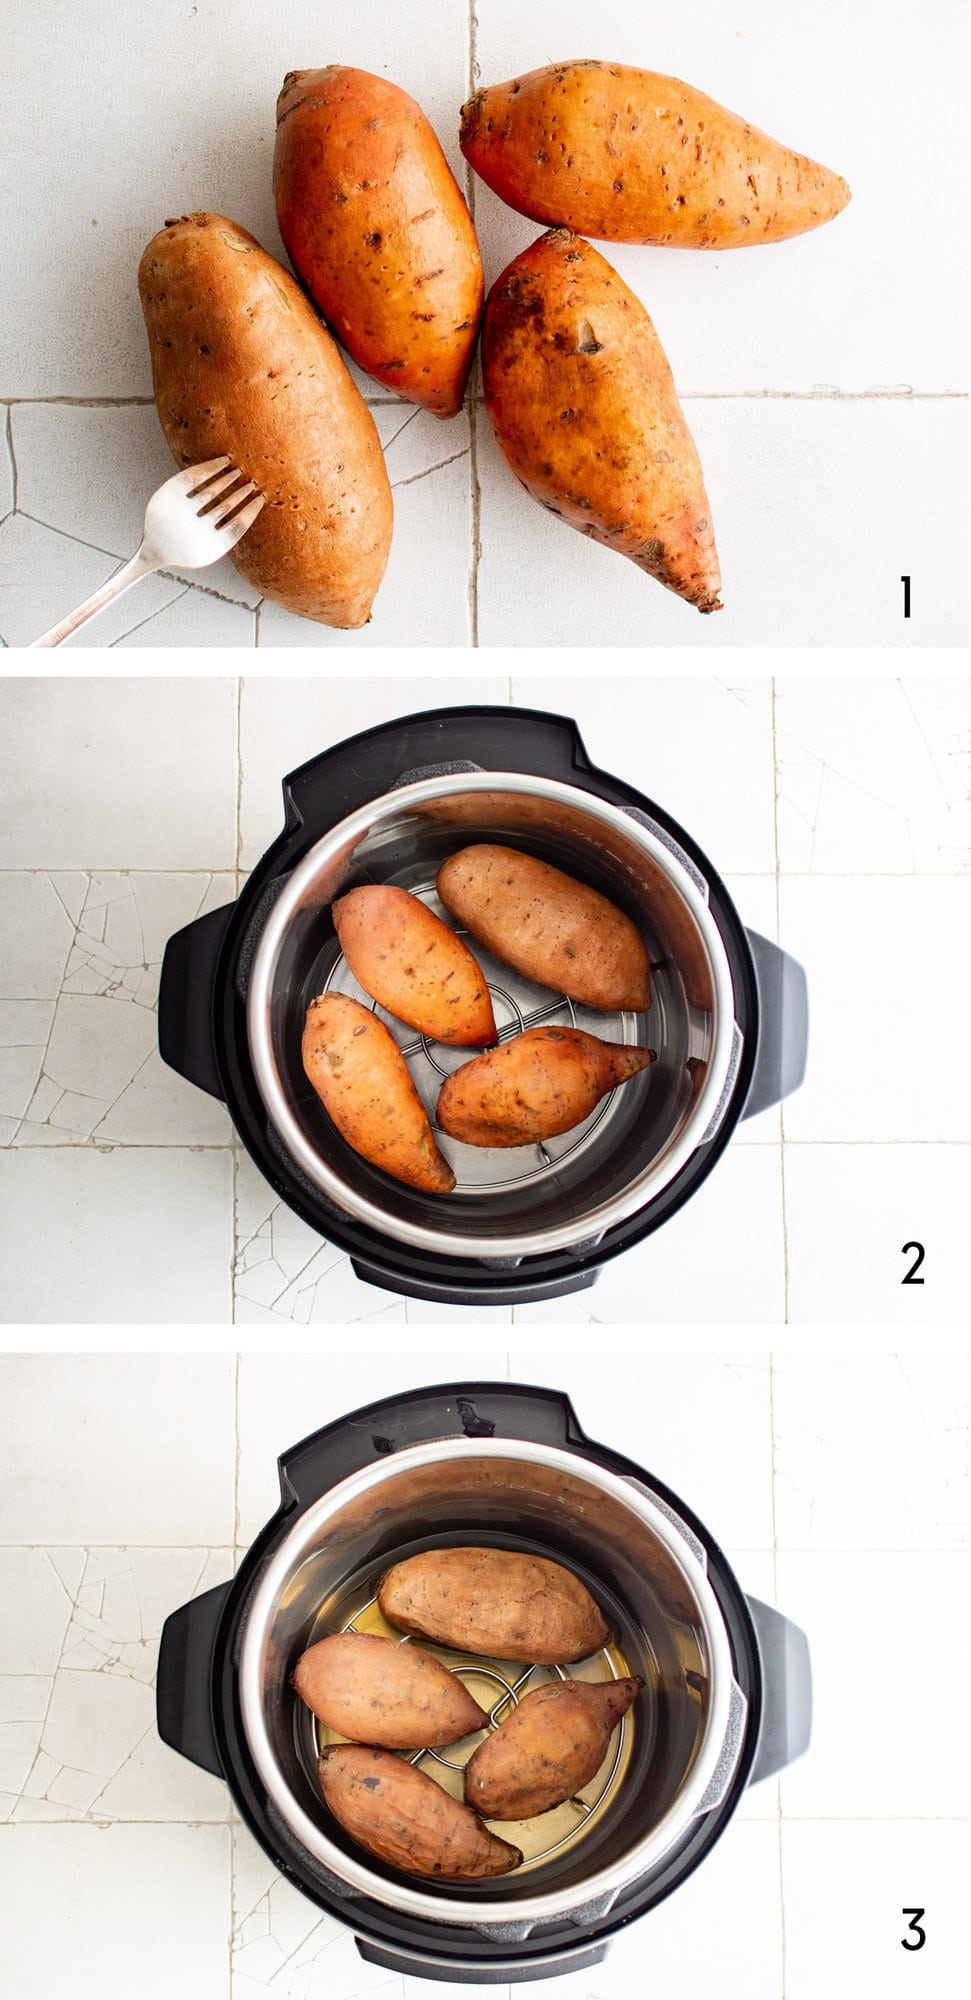 Collage of 3 images showing sweet potatoes cooking in an instant pot.